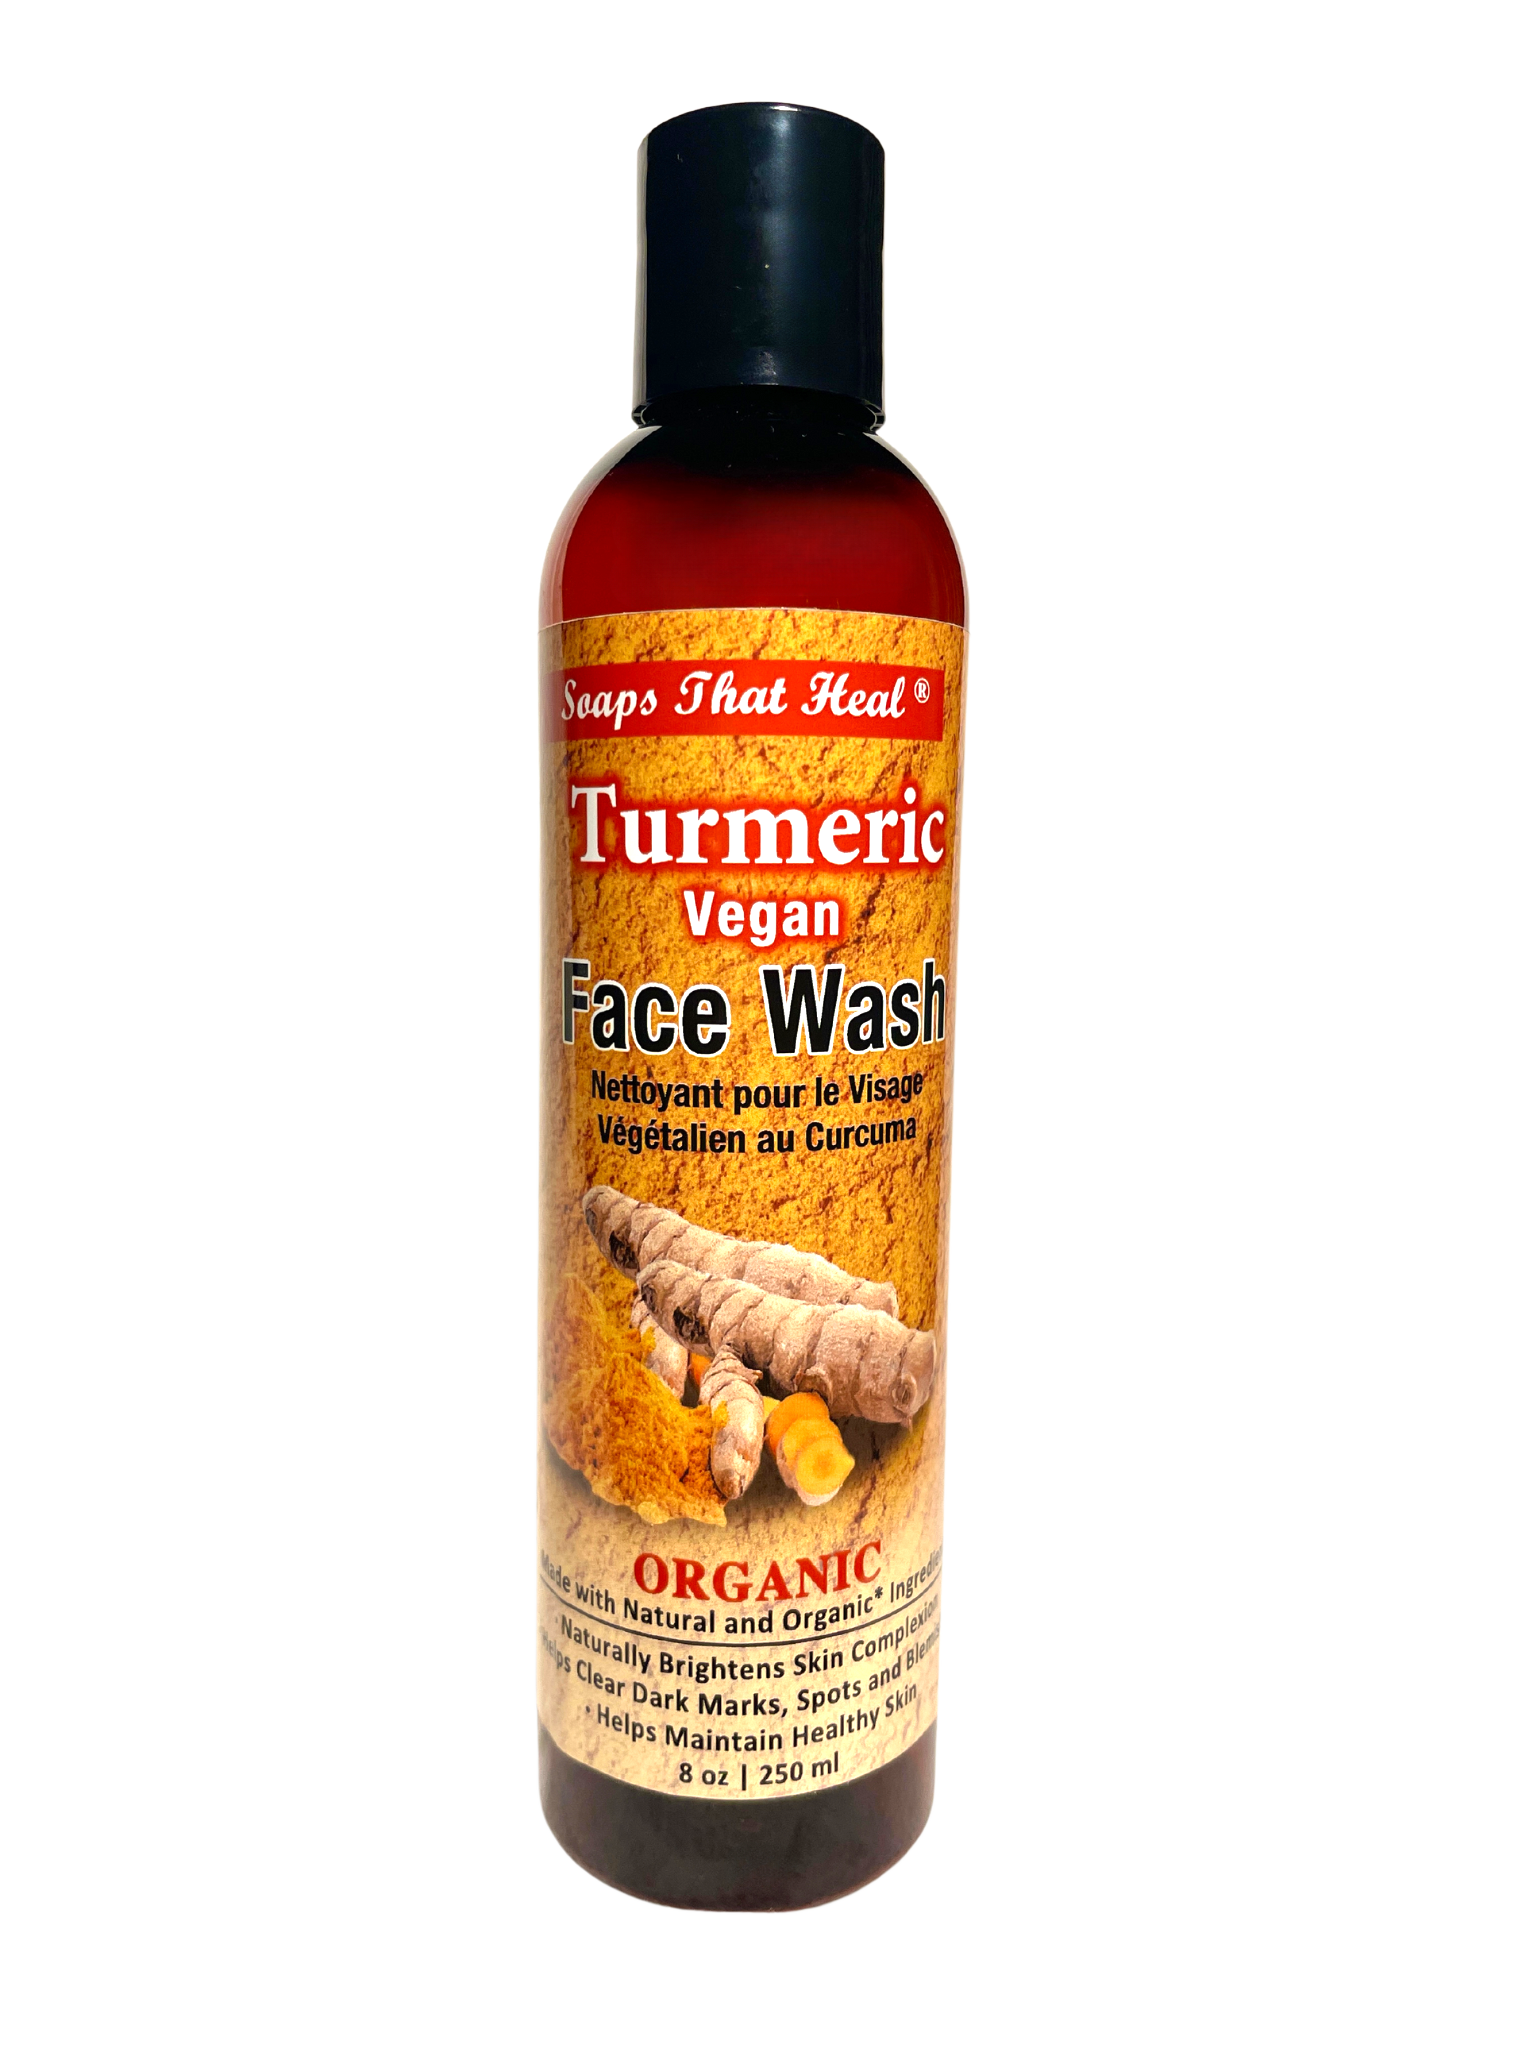 turmeric vegan face wash, soaps that heal turmeric soap, natural lightening, natural alternatives to whitening creams,fade creams,bleaching creams,Remove Dark Spots and Acne,aspen kay,Healthy Skin, Natural Products Skin Care, problem skin,Turmeric Soap,the best body soap,saje,soaps that heal,healing soap, how to get rid of dark marks,dark spots,whitening soaps,lightening soaps,hyperpigmentation, best turmeric soap,oilblends,uncle benney's,soaps that heal